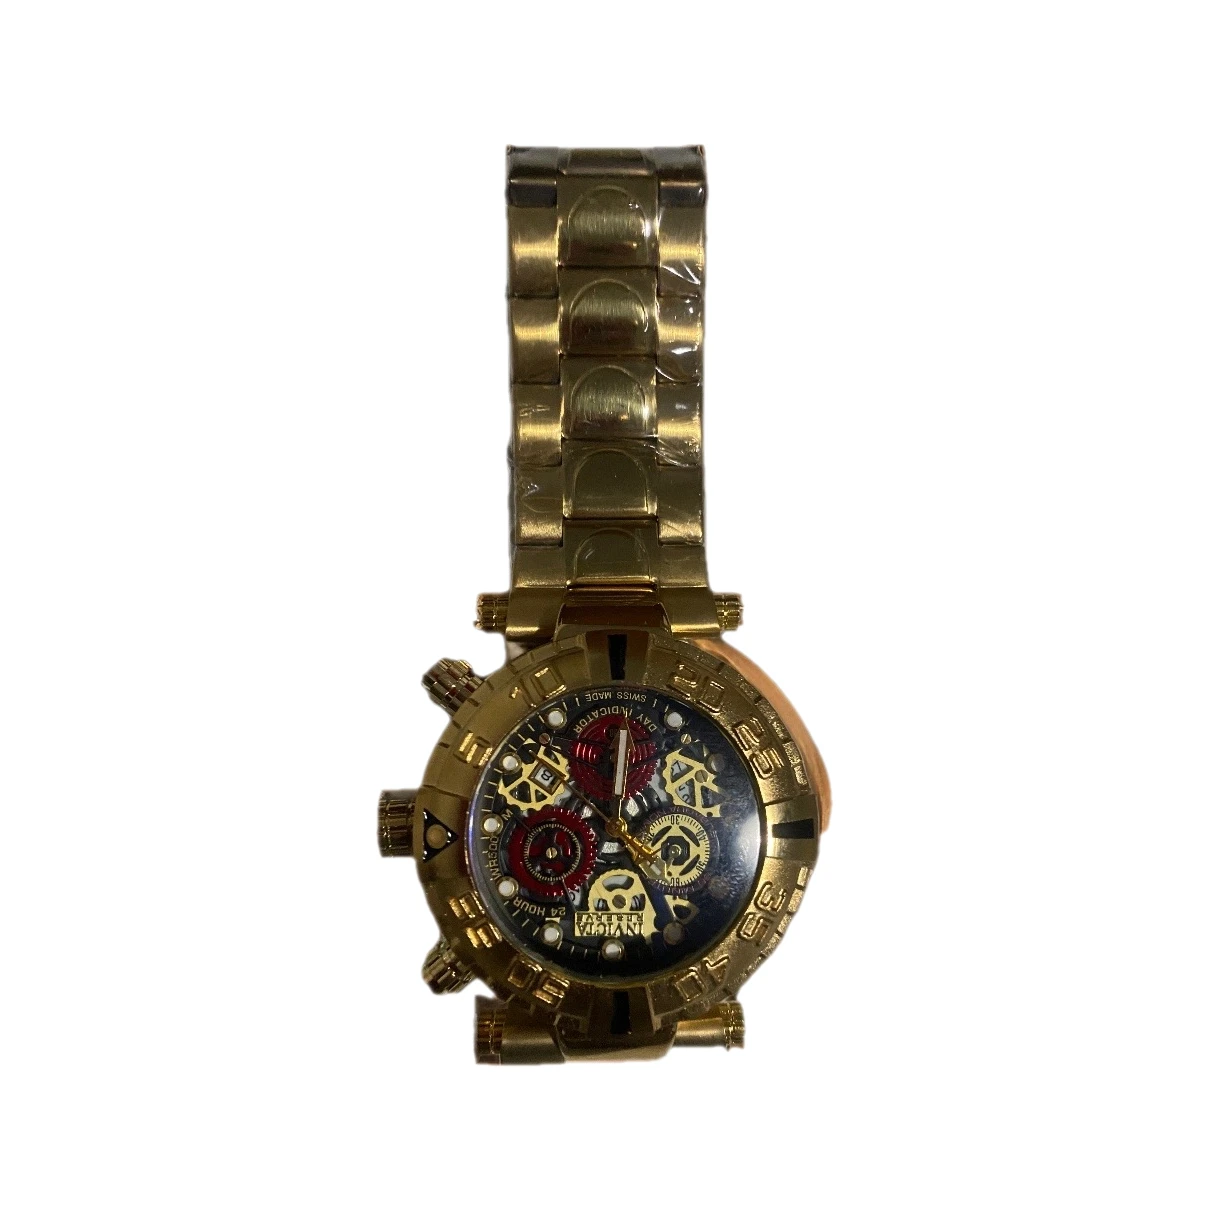 Pre-owned Invicta Gold Watch